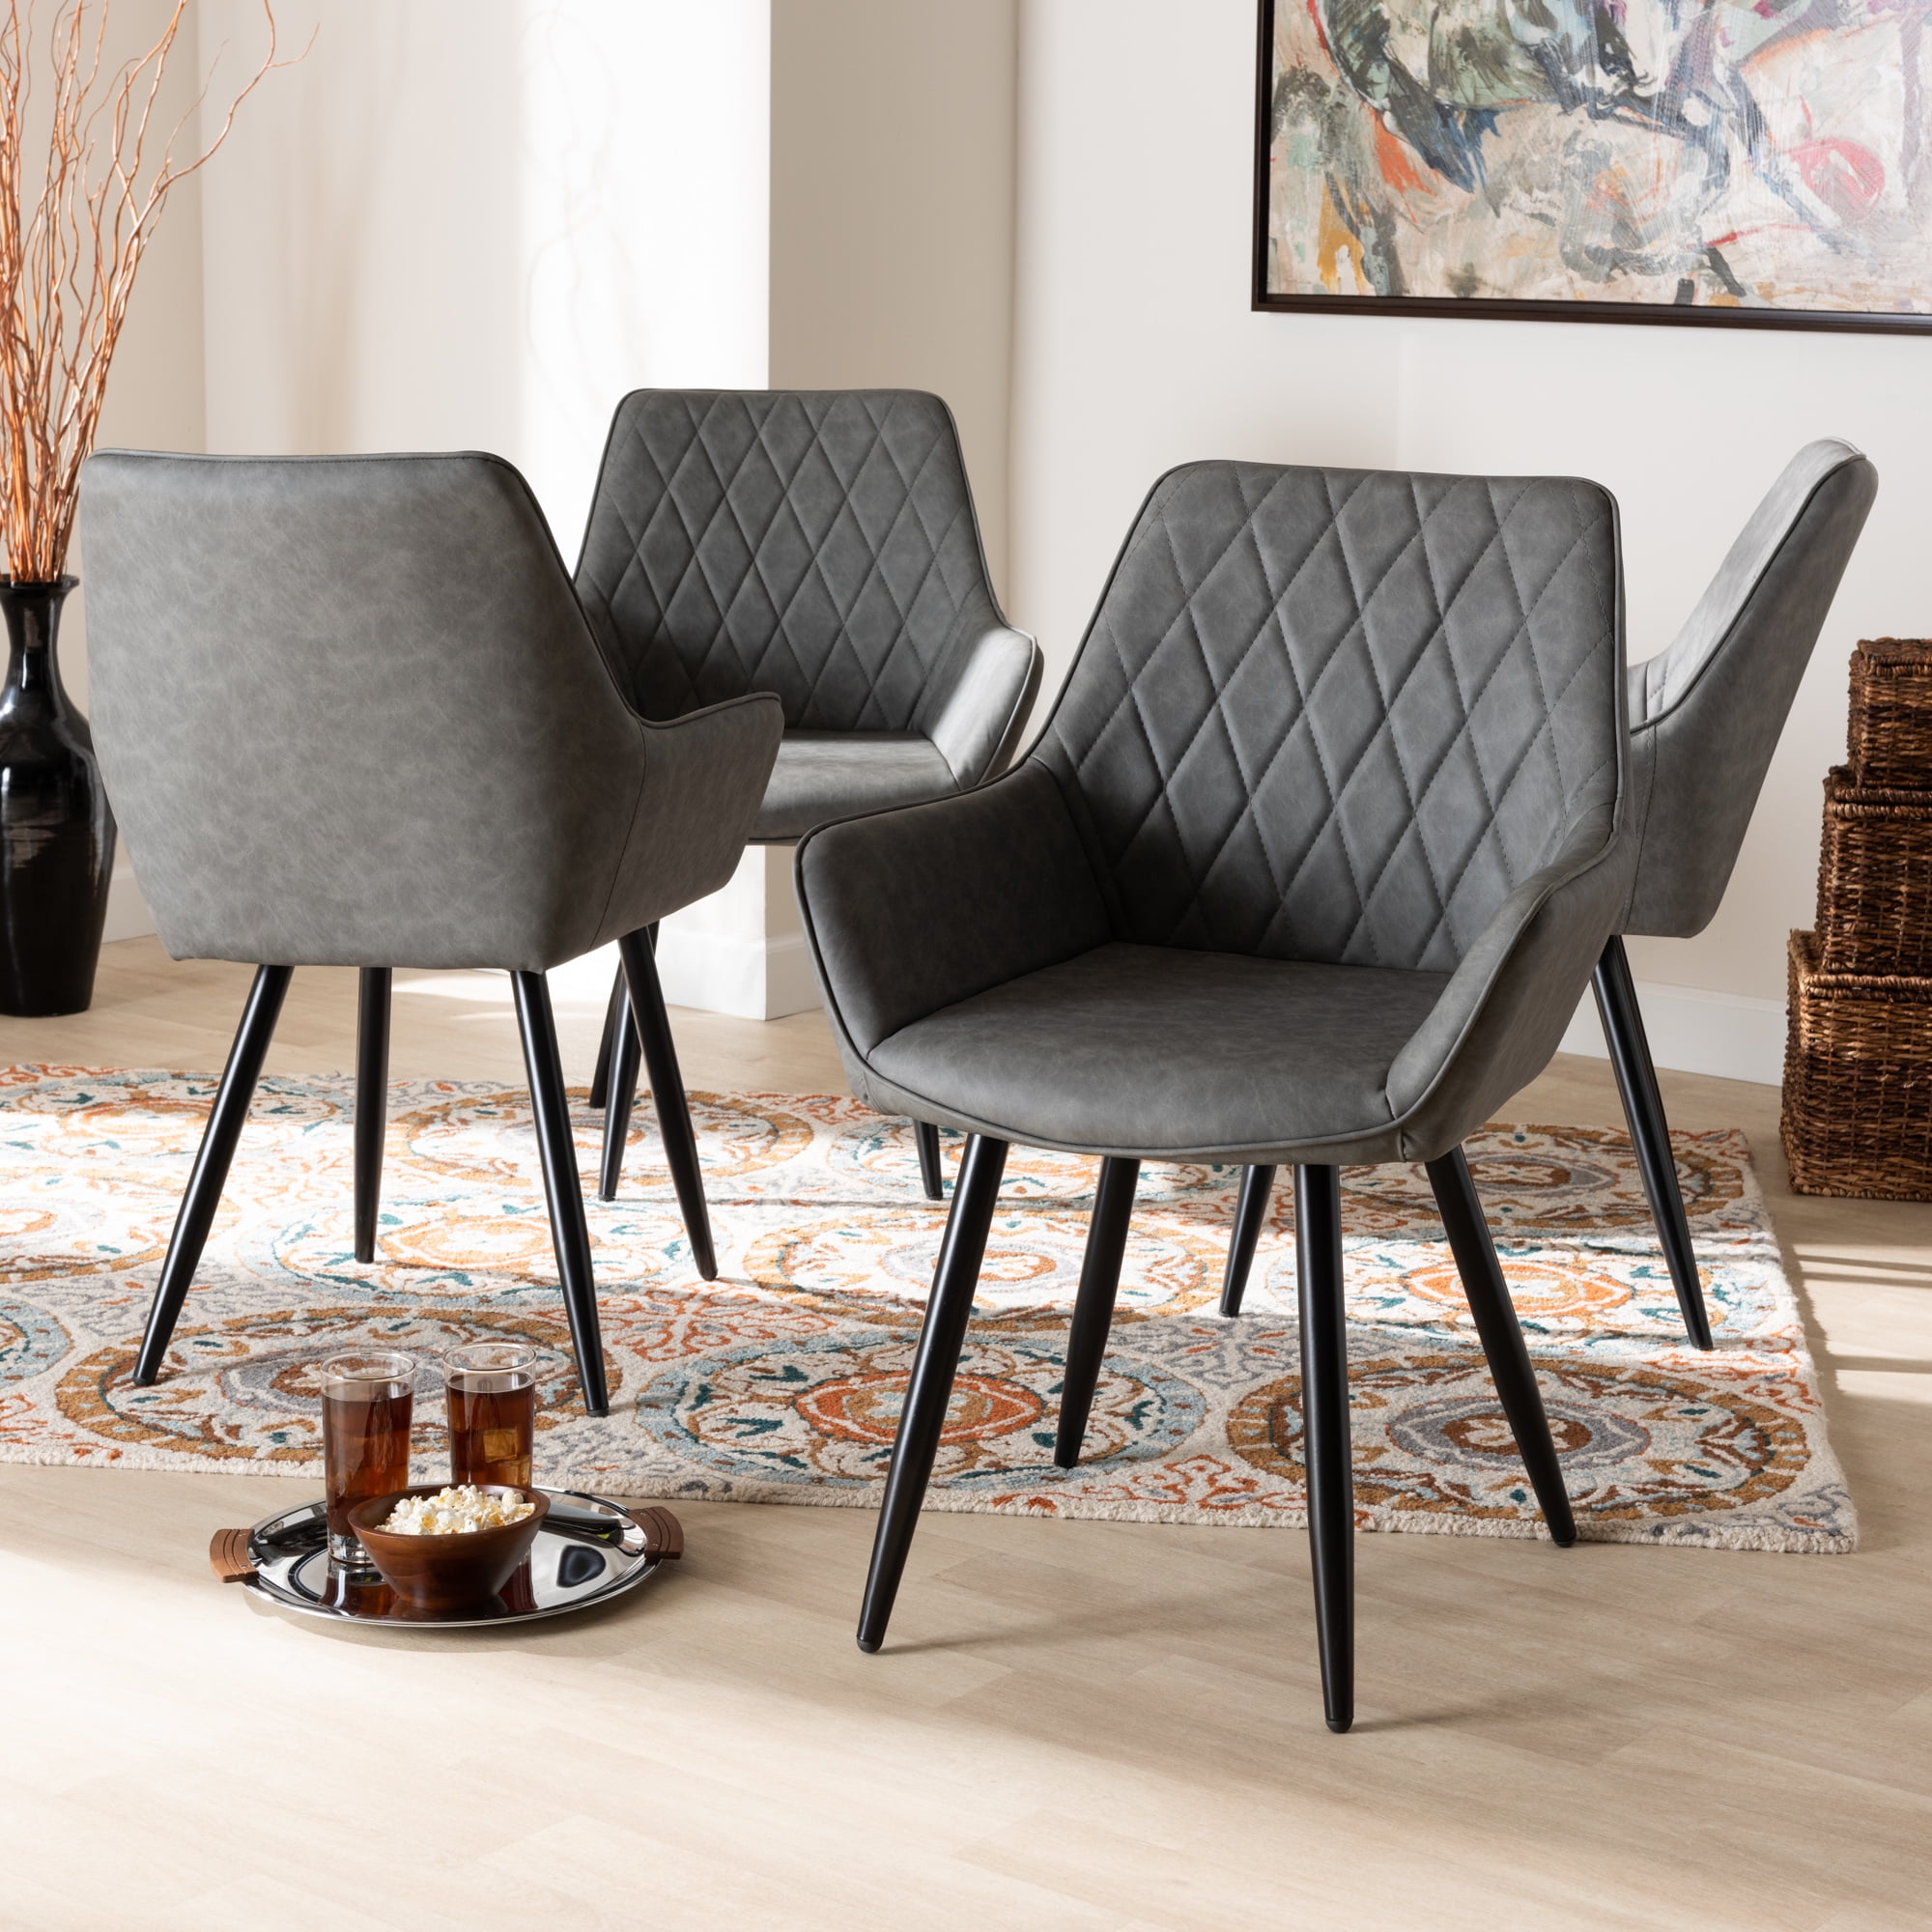 Black Metal 4 Piece Dining Chair Set, Grey Faux Leather Dining Chairs Set Of 4